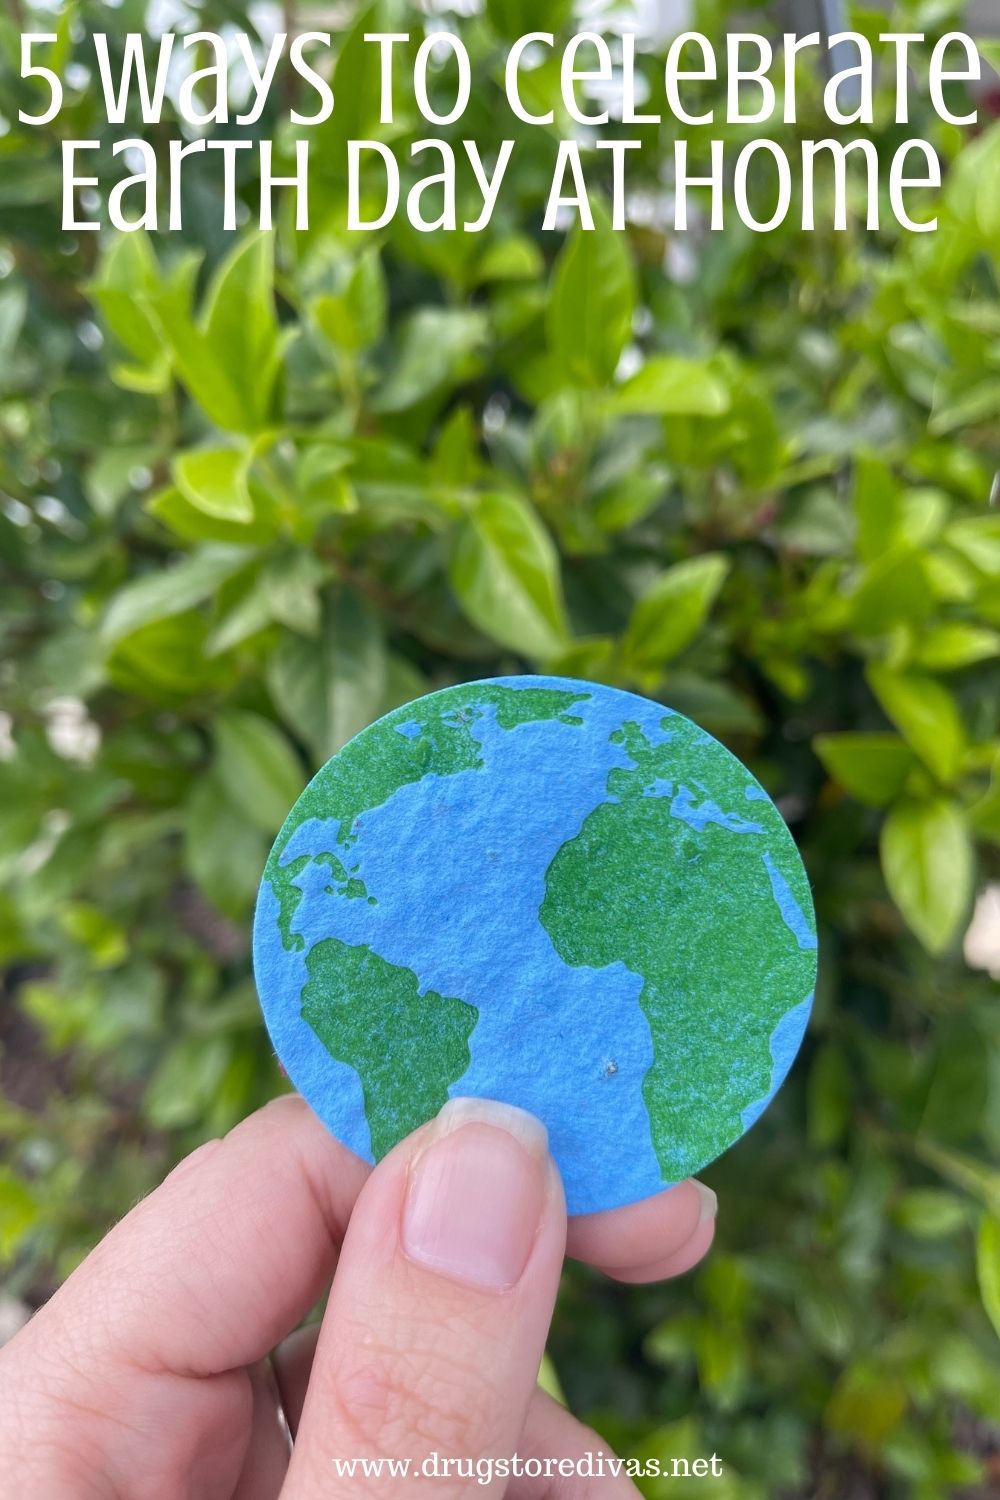 Earth Day is a great day to teach your kids about sustainability. Get 5 Ways To Celebrate Earth Day At Home in this post.